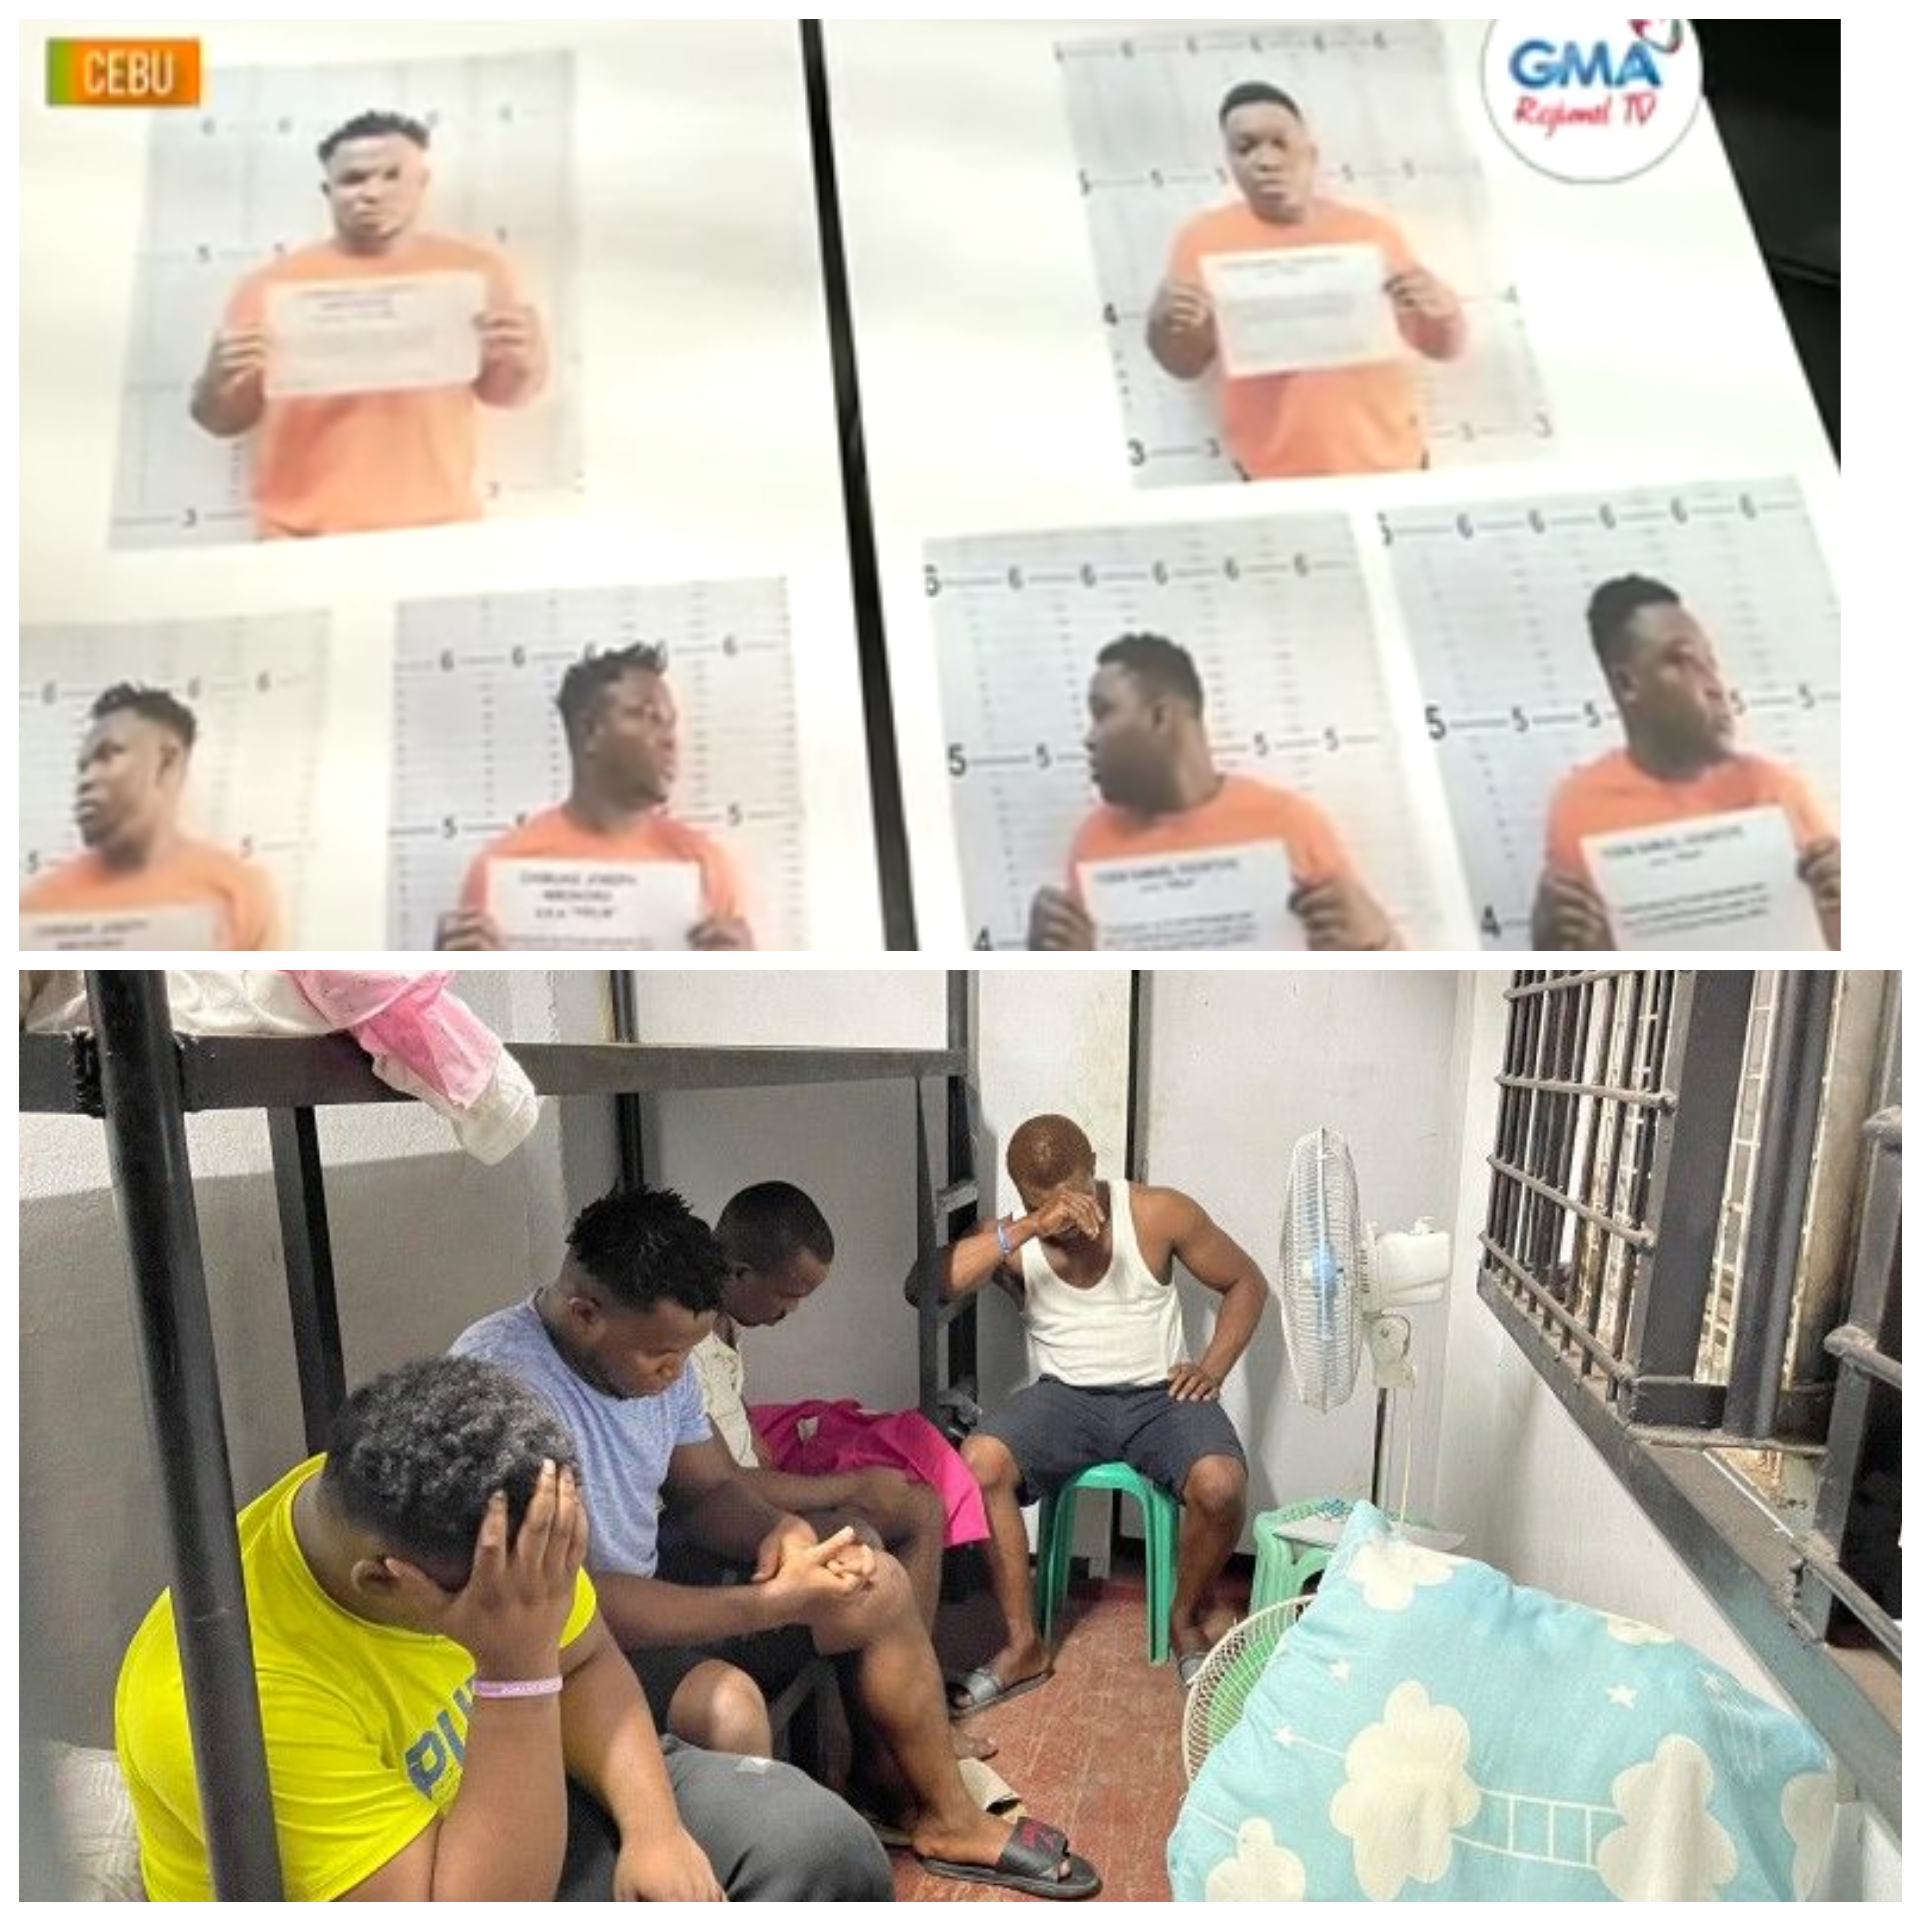 Four Nigerians arrested in Philippines for allegedly forging govt IDs, other documents after being exposed by a lady